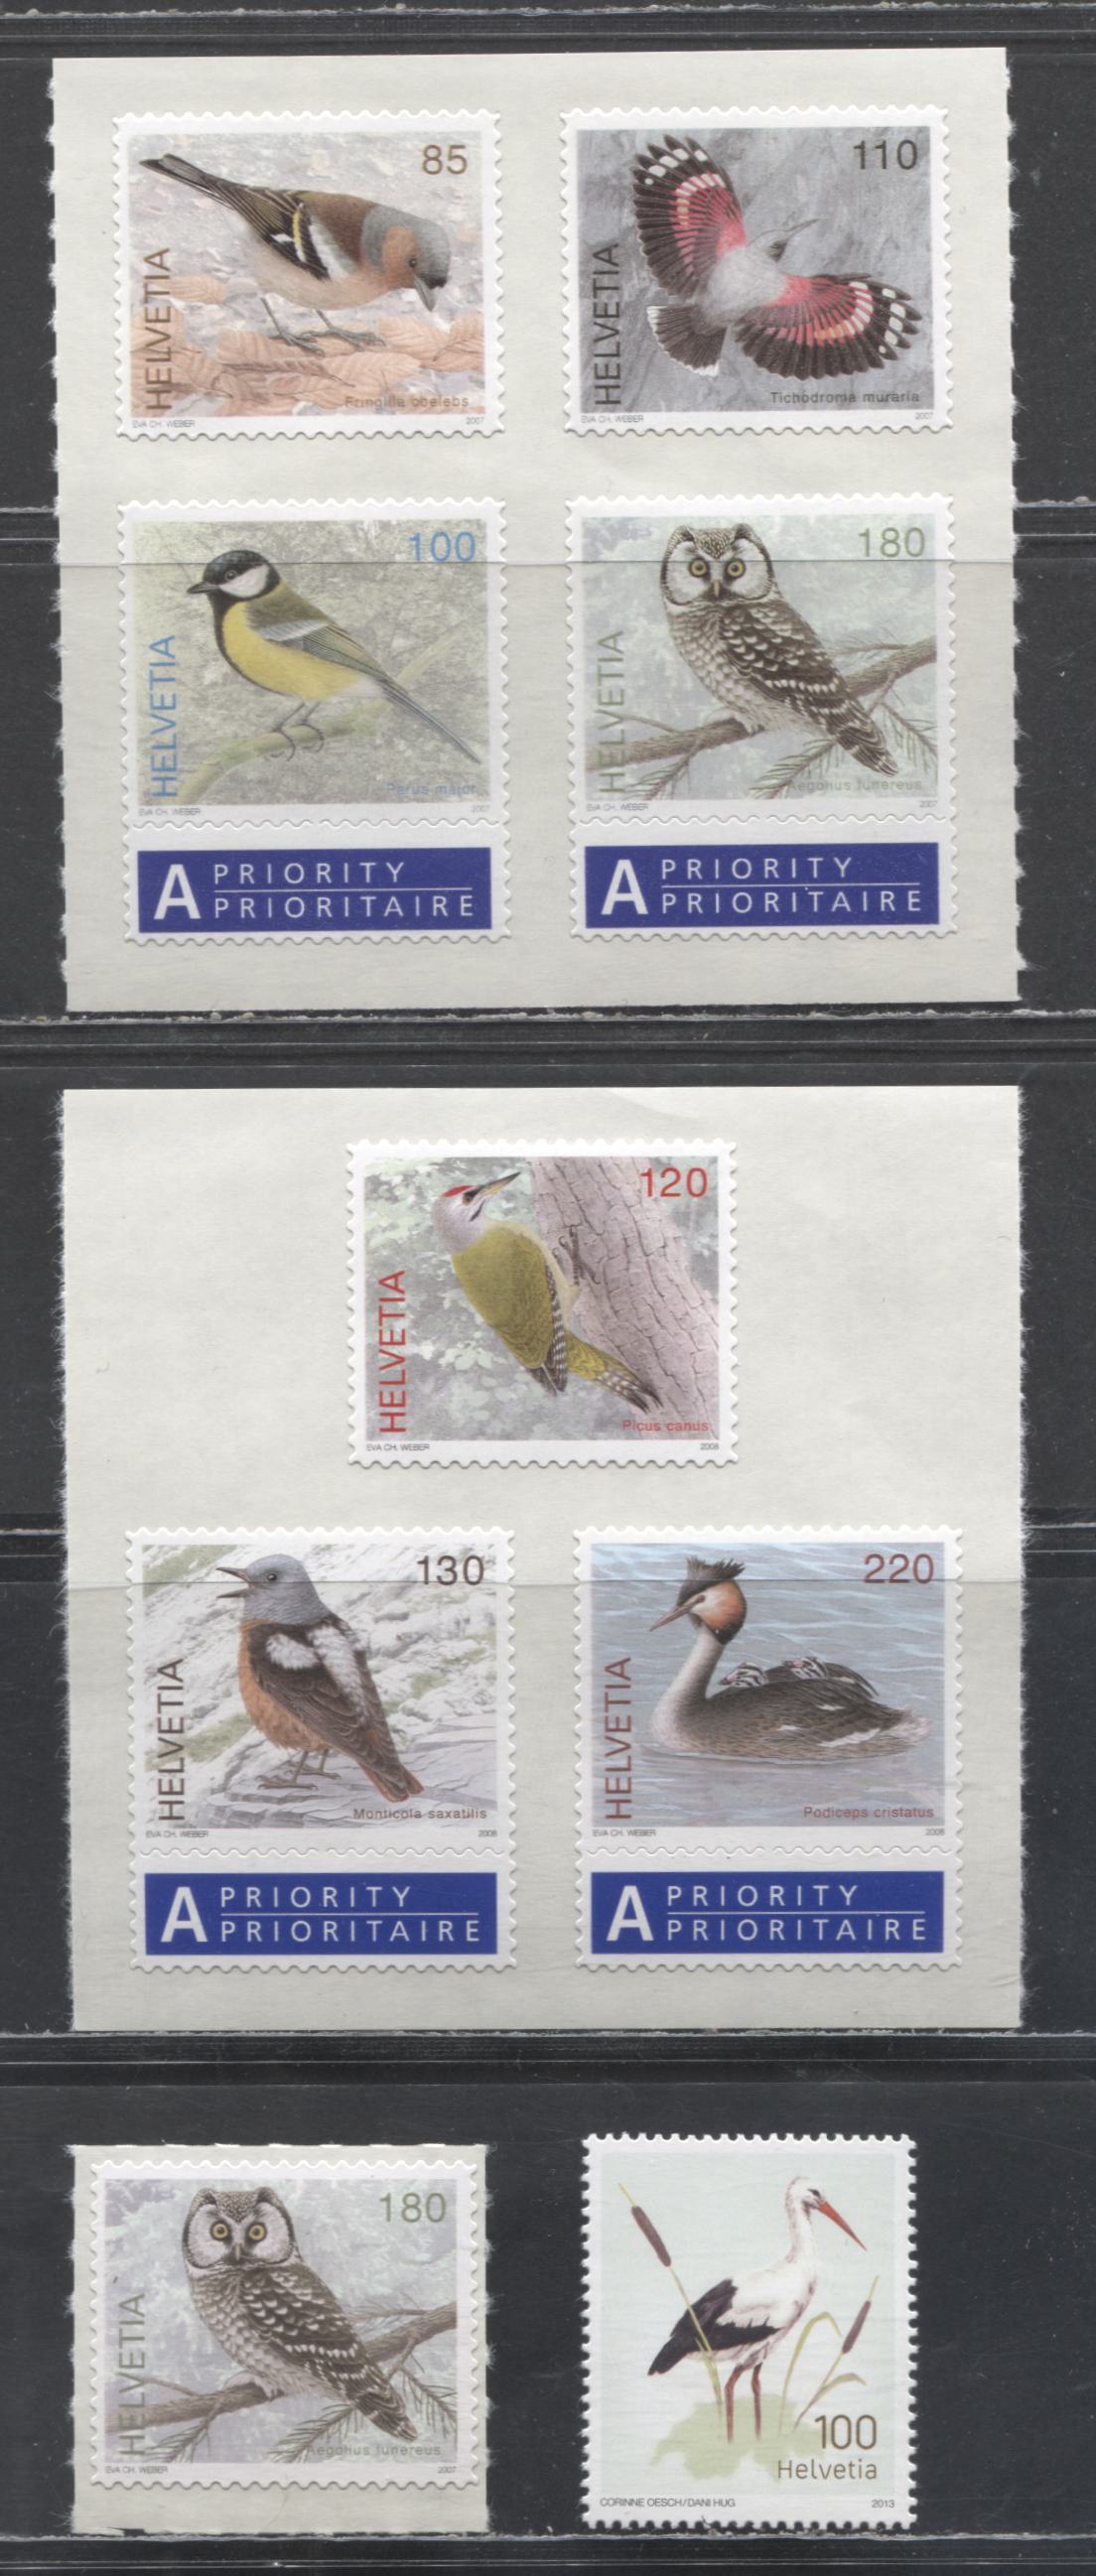 Lot 10 Switzerland SC#1276/1484 2007-2013 Bird Definitives - White Stork Issues, With Etiquettes, 4 VFNH Singles & Blocks Of 3 & 4, Click on Listing to See ALL Pictures, 2017 Scott Cat. $28.35